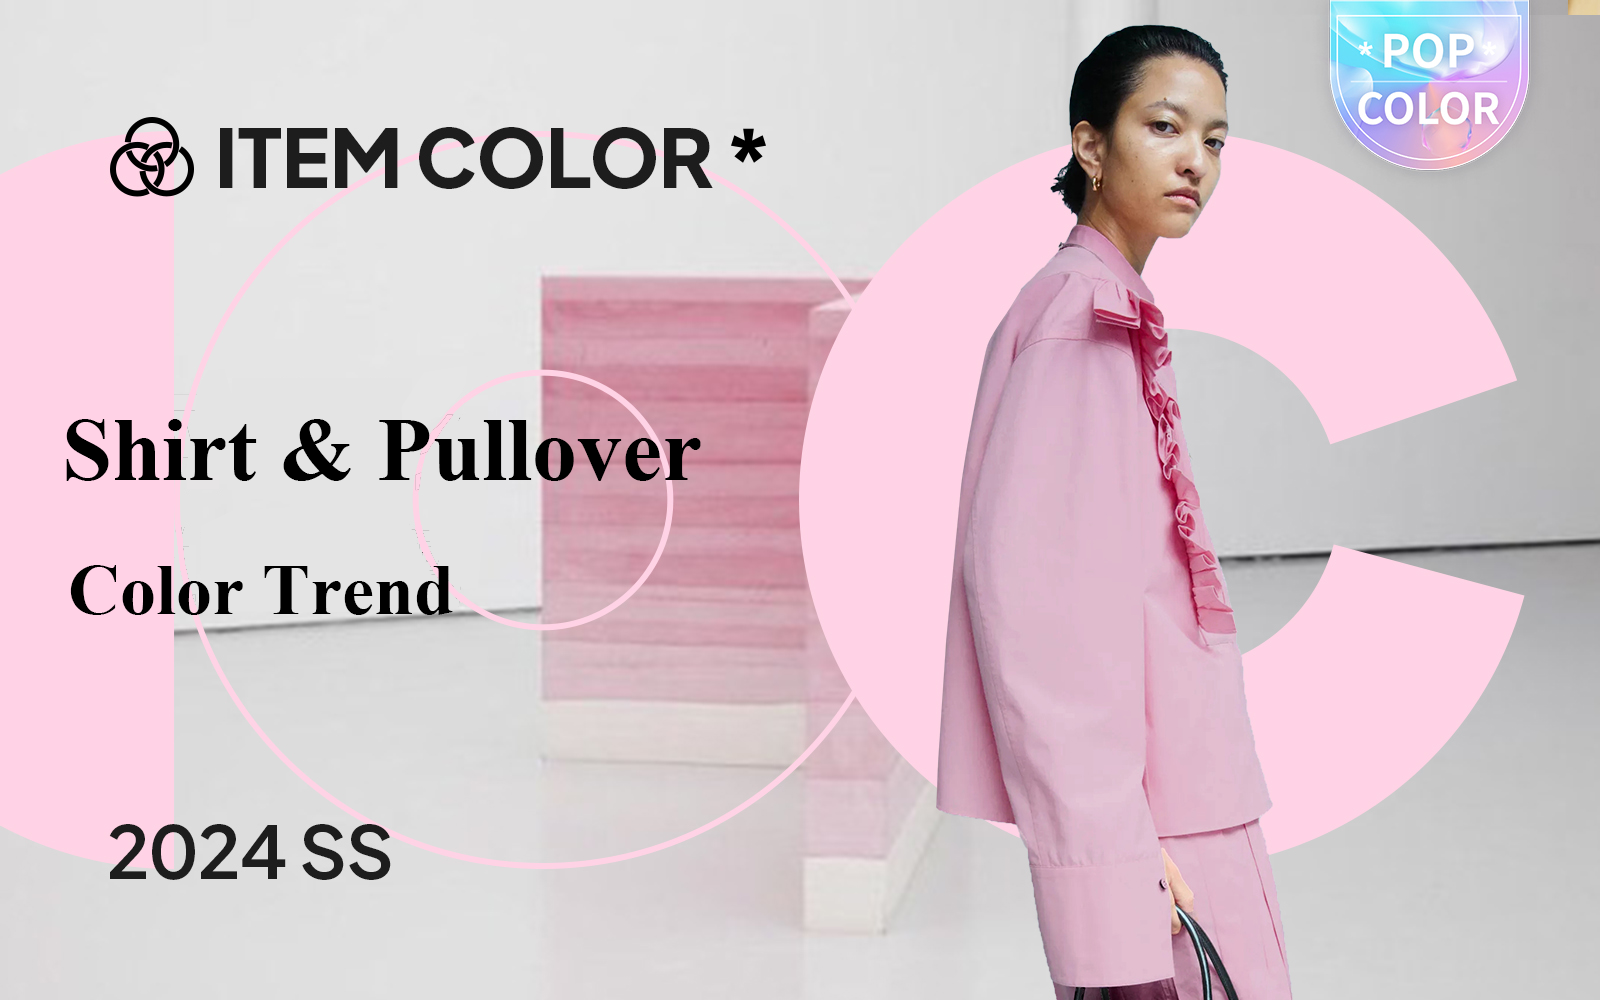 New Romantic Tones -- The Color Trend for Women's Shirt & Pullover